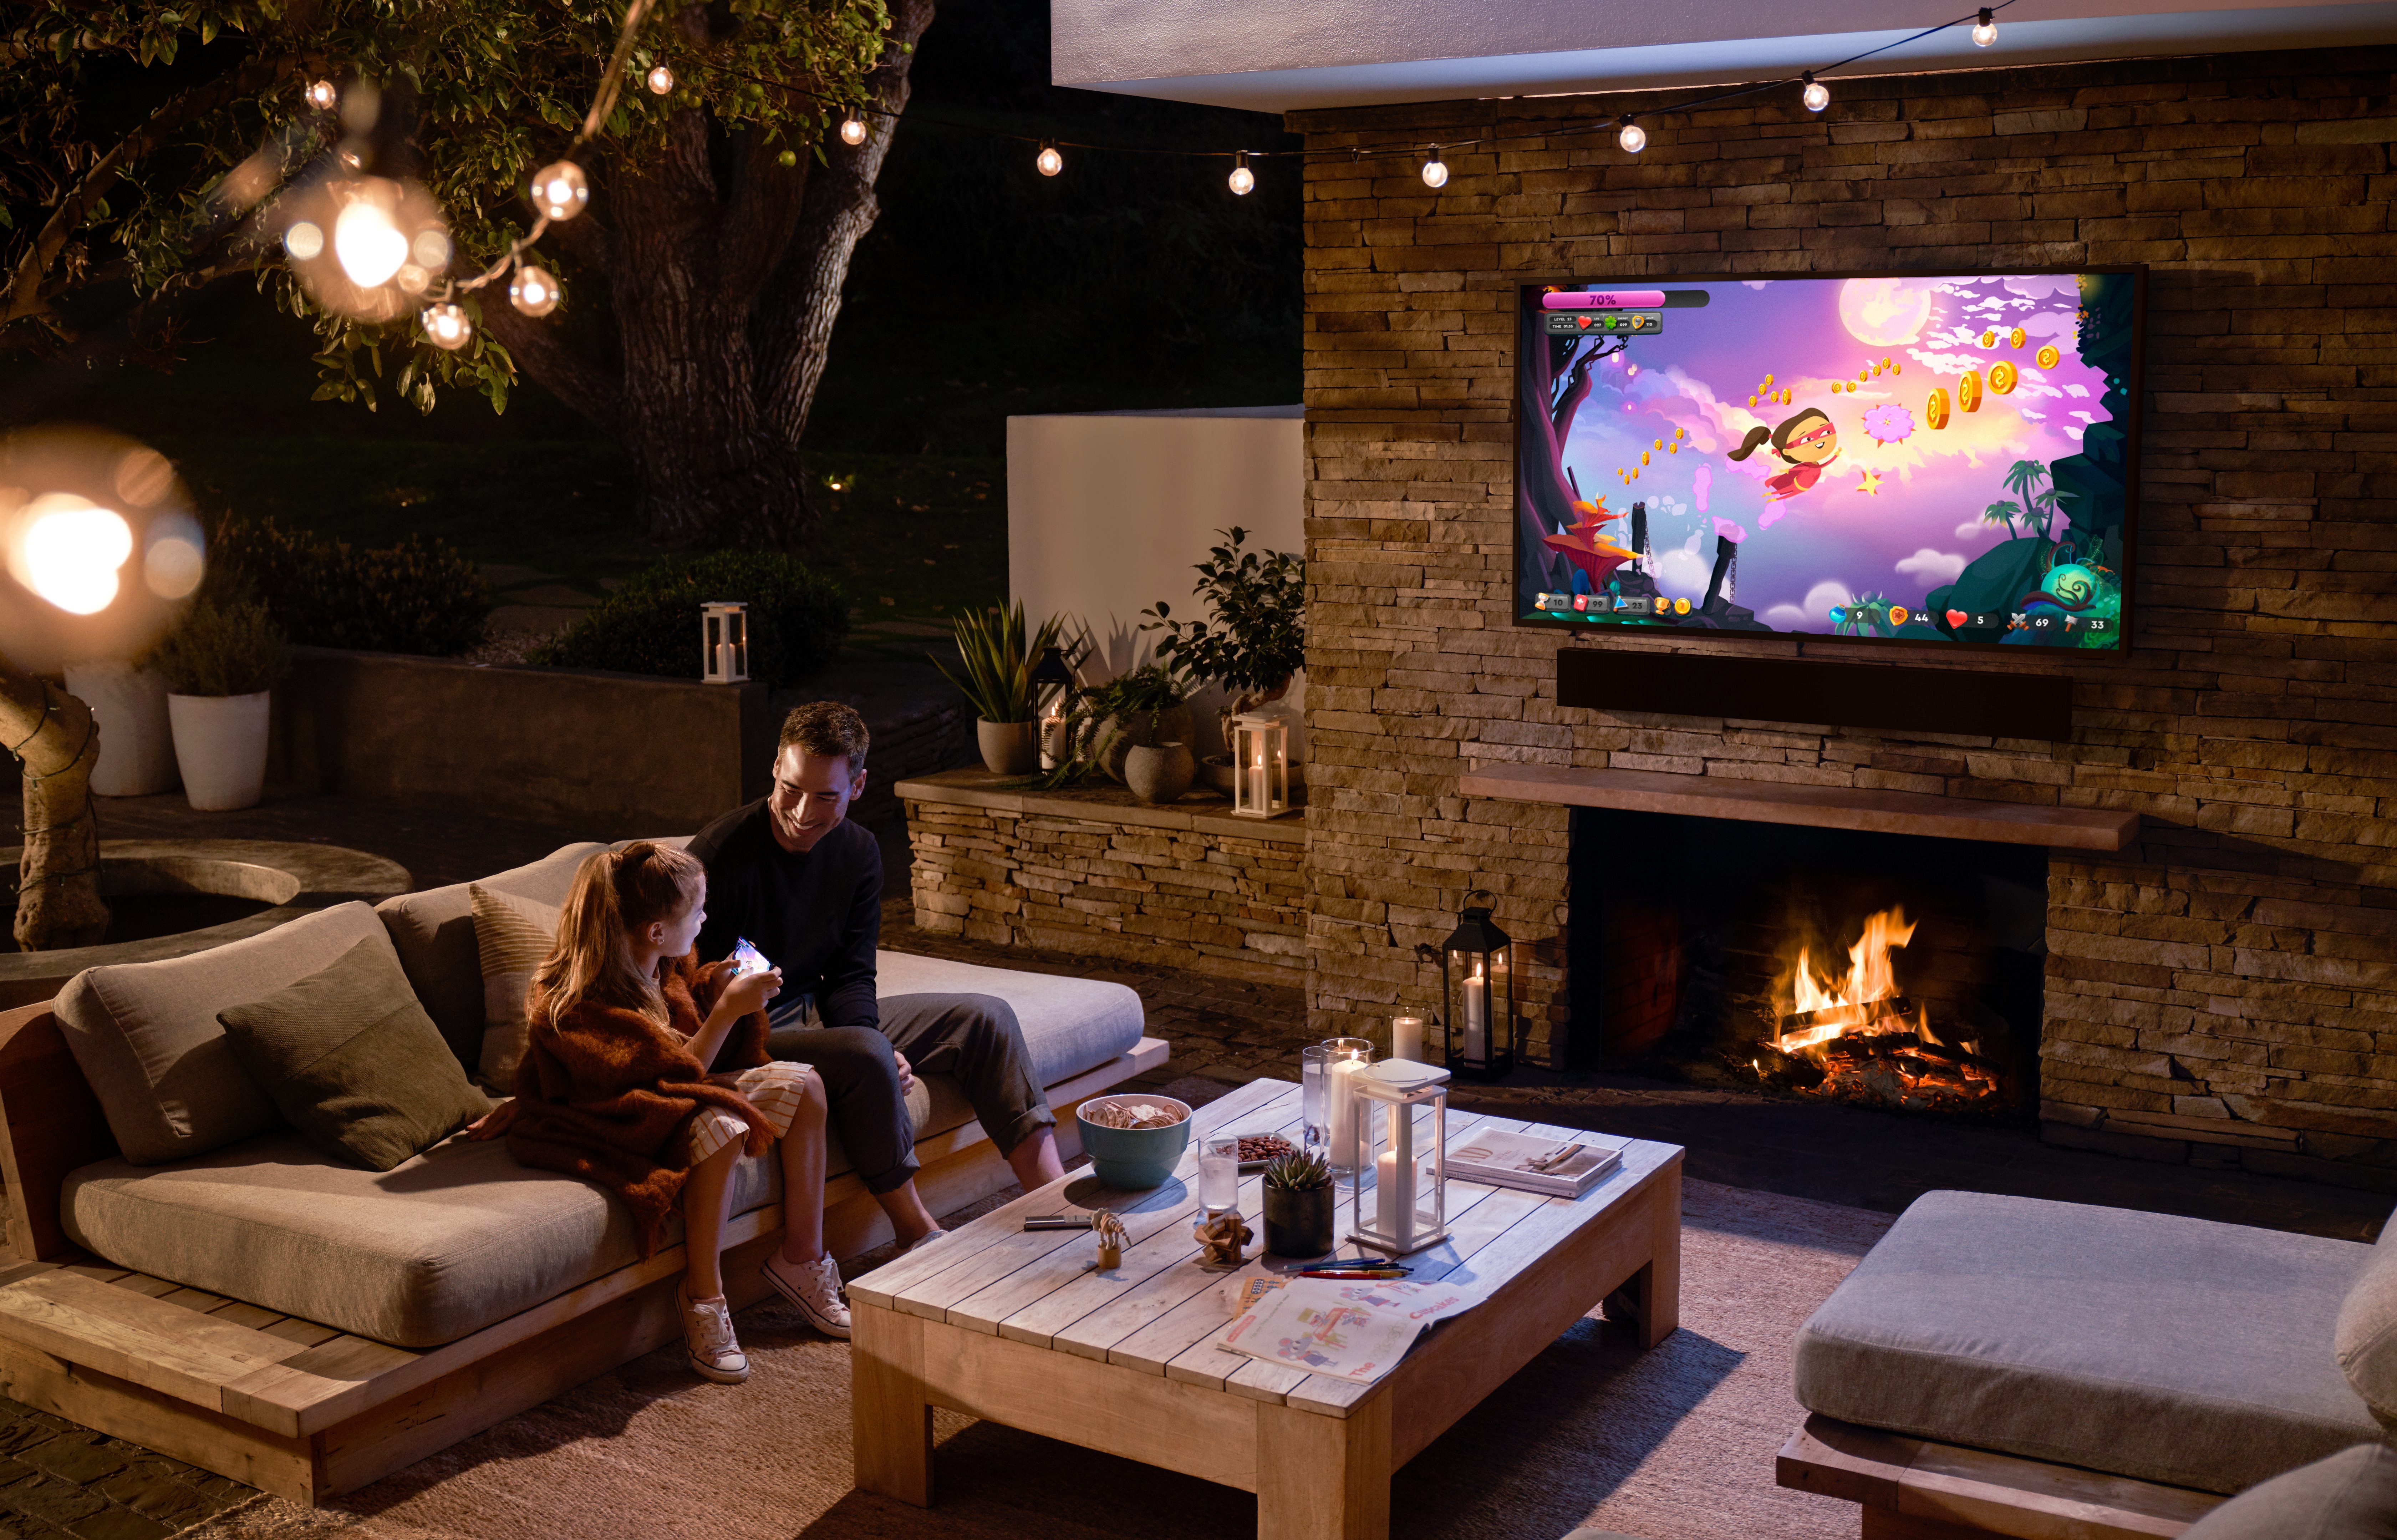 Shade or Sun, There’s a Perfect Outdoor TV for Your Space